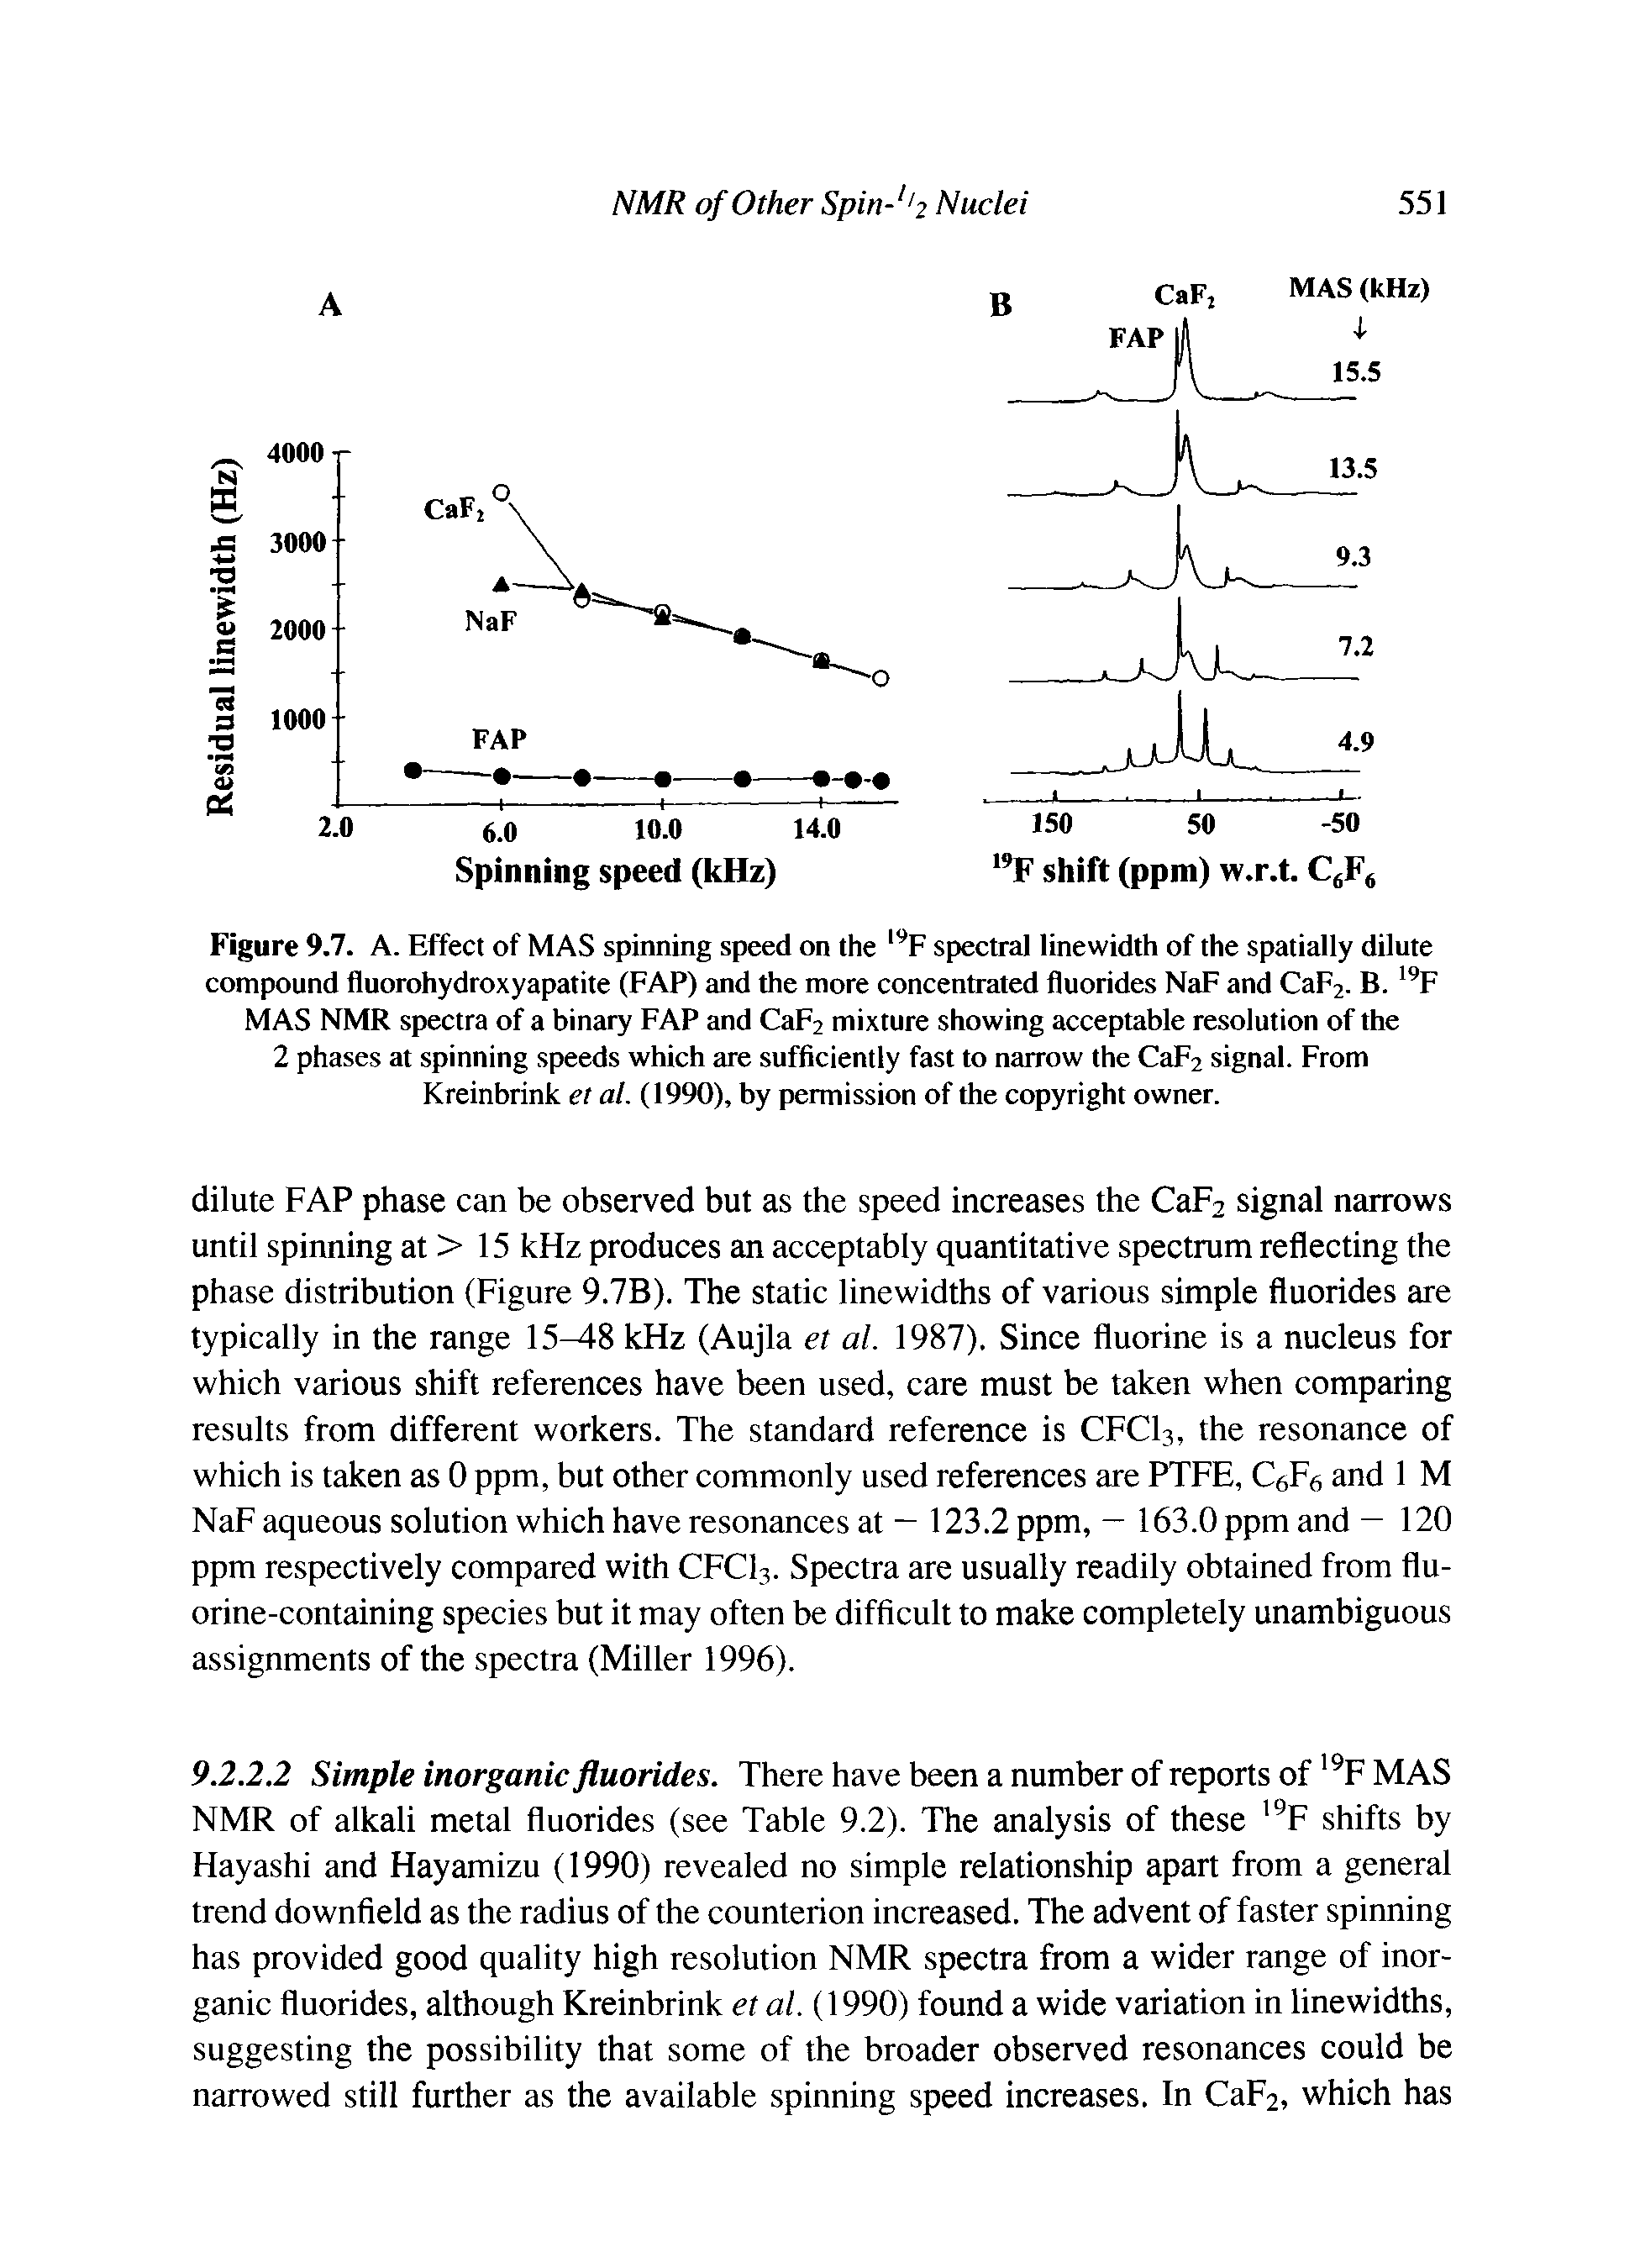 Figure 9.7. A. Effect of MAS spinning speed on the spectral linewidth of the spatially dilute compound fluorohydroxyapatite (FAP) and the more concentrated fluorides NaF and CaF2- B. F MAS NMR spectra of a binary FAP and CaF2 mixture showing acceptable resolution of the 2 phases at spinning speeds which are sufficiently fast to narrow the Cap2 signal. From Kreinbrink et al. (1990), by permission of the copyright owner.